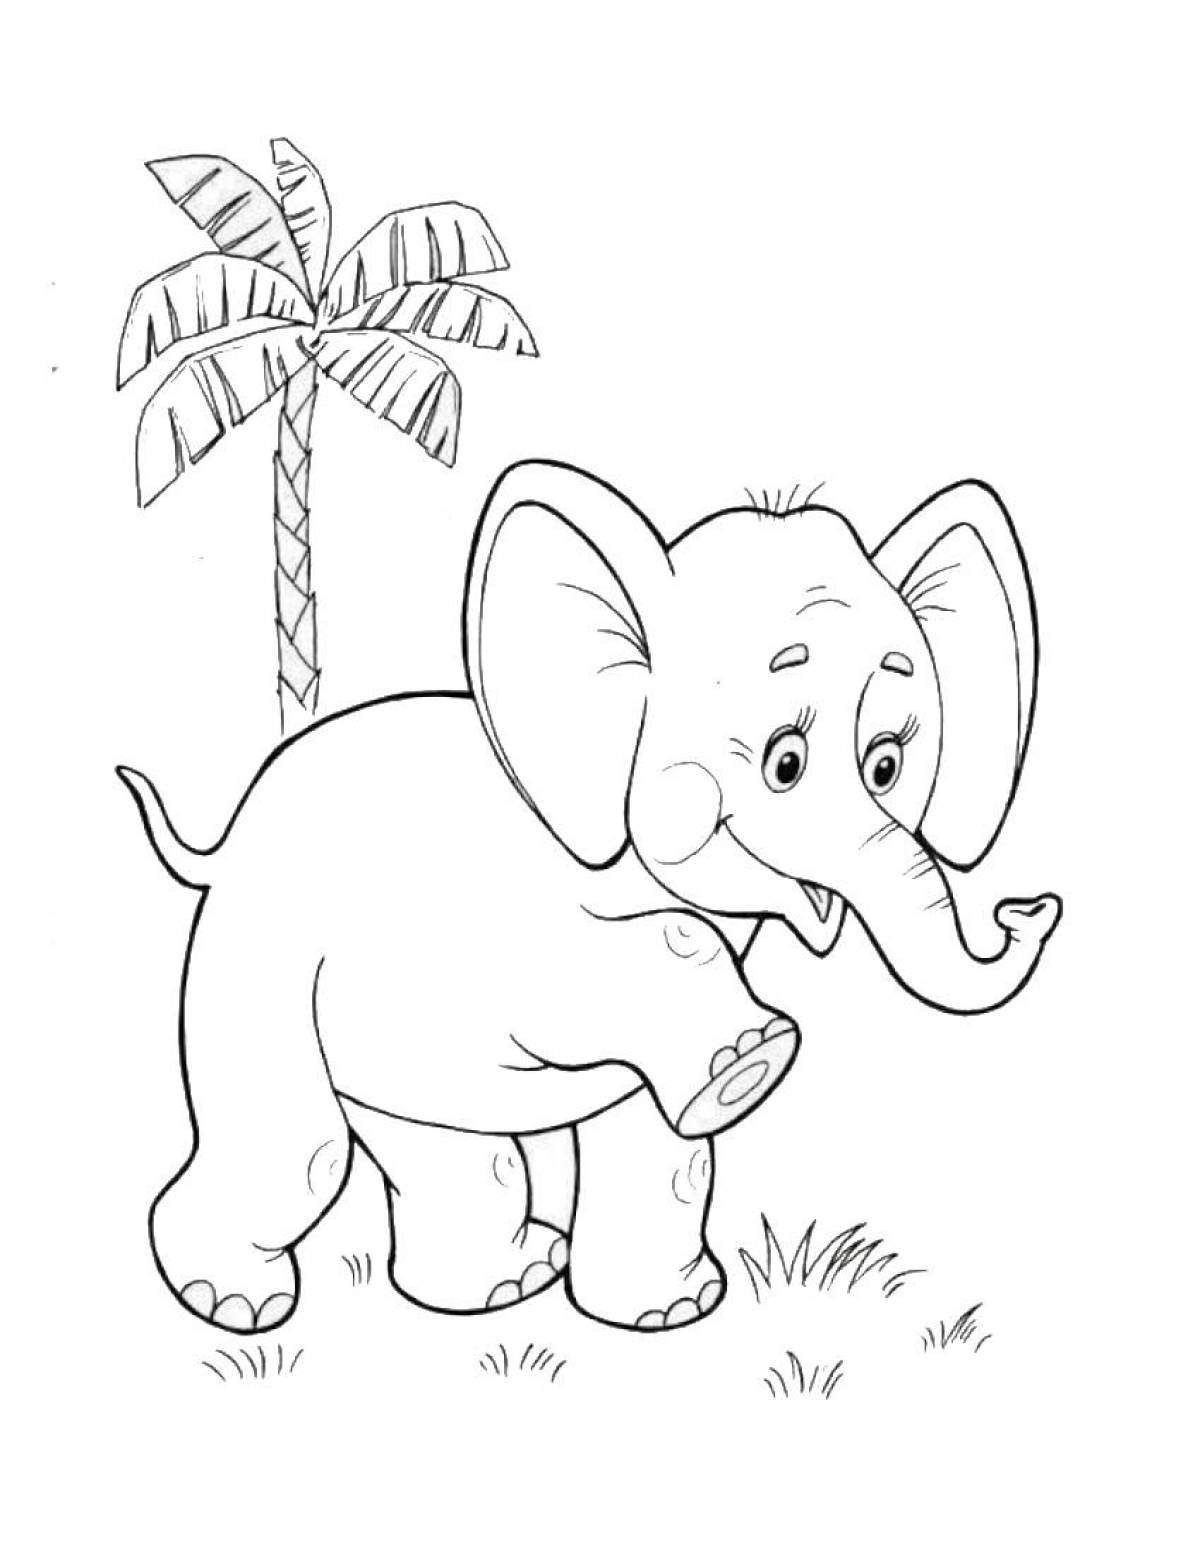 Tempting coloring pages animals of hot countries for preschoolers